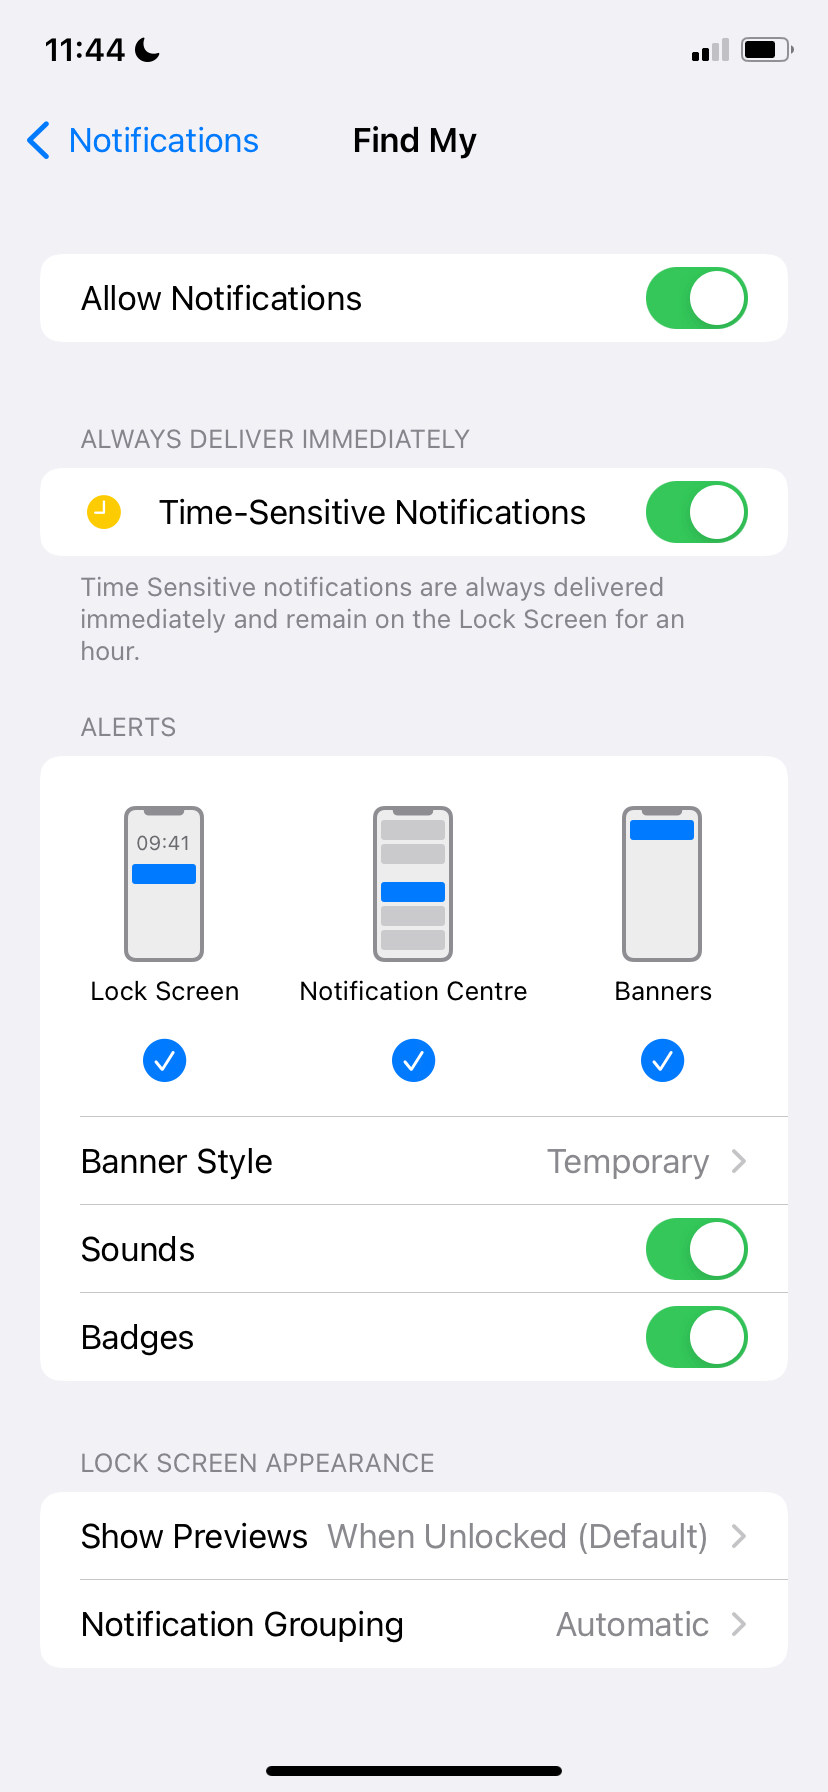 Find My app with Time-Sensitive notifications enabled